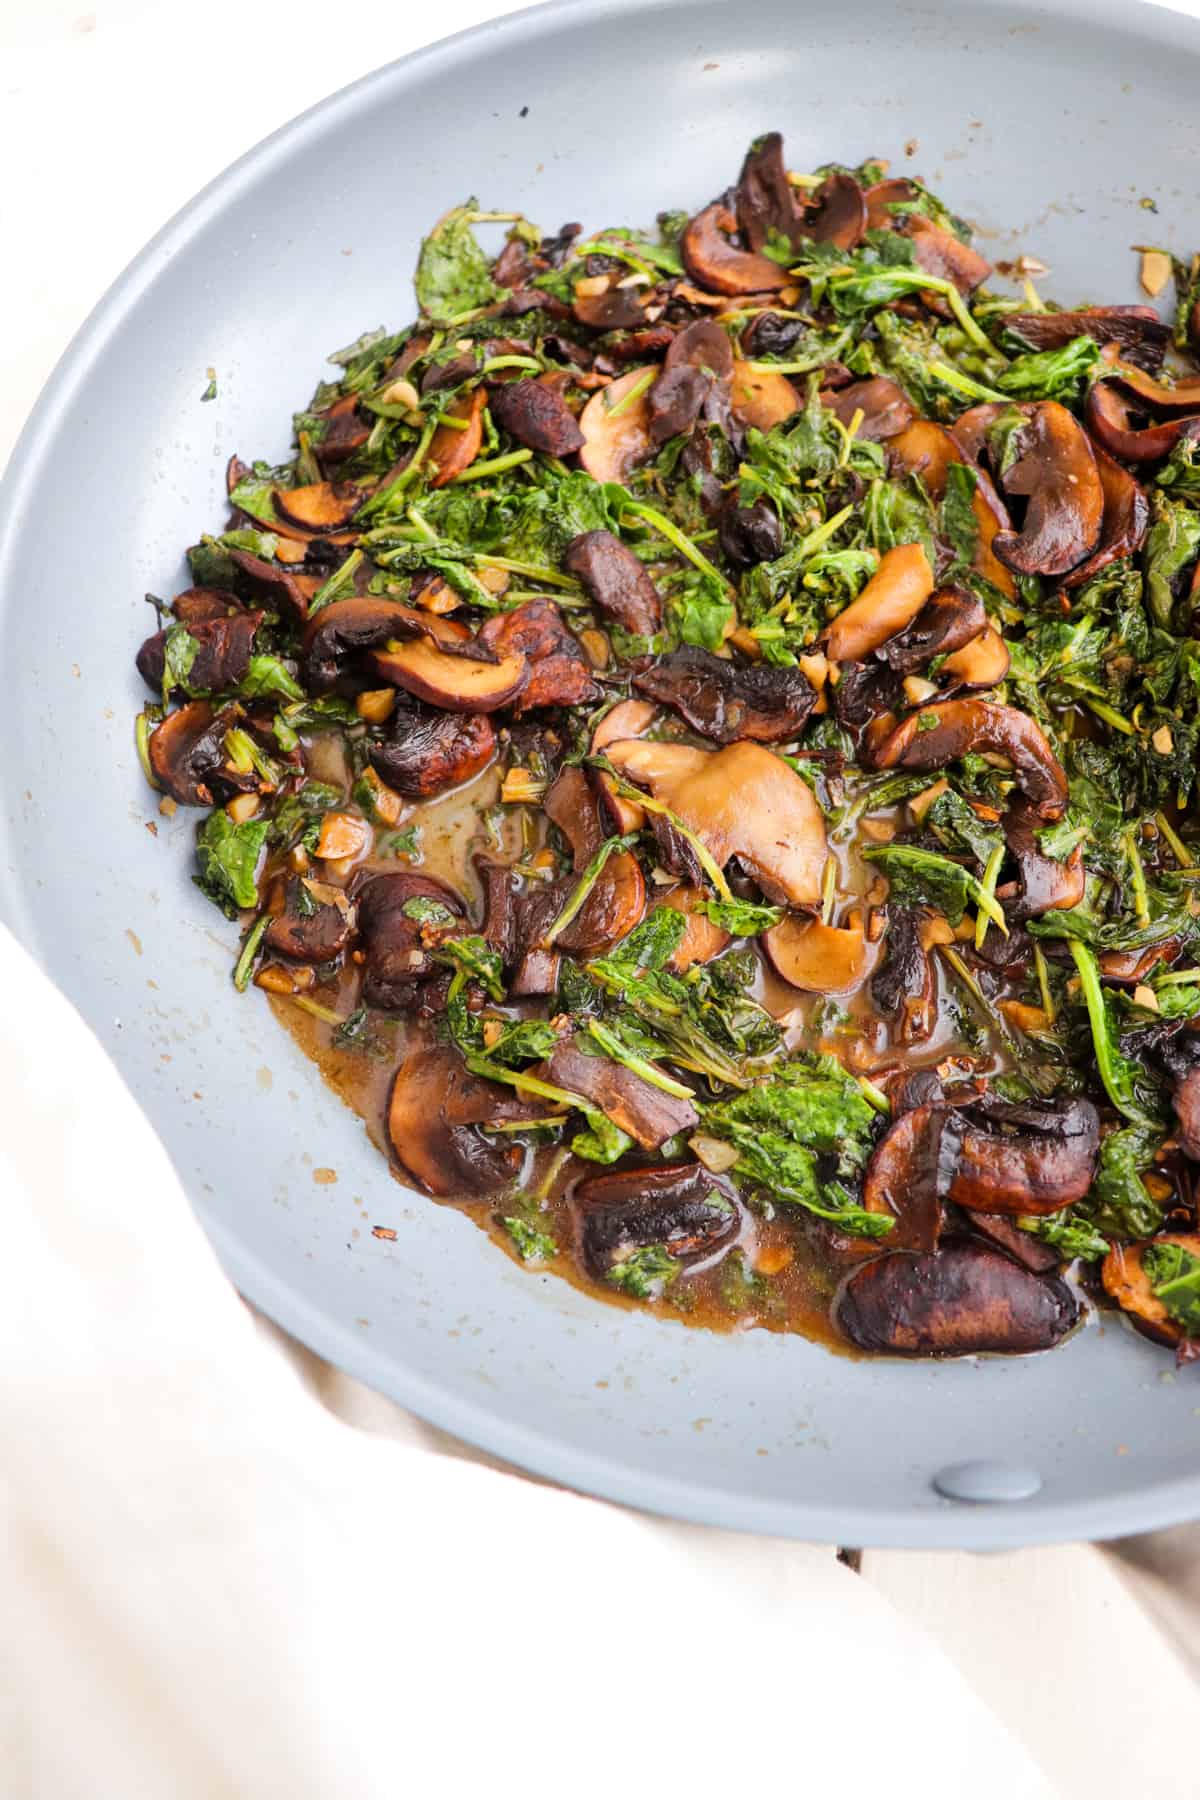 finished sauteed mushrooms and kale with balsamic in a pan.